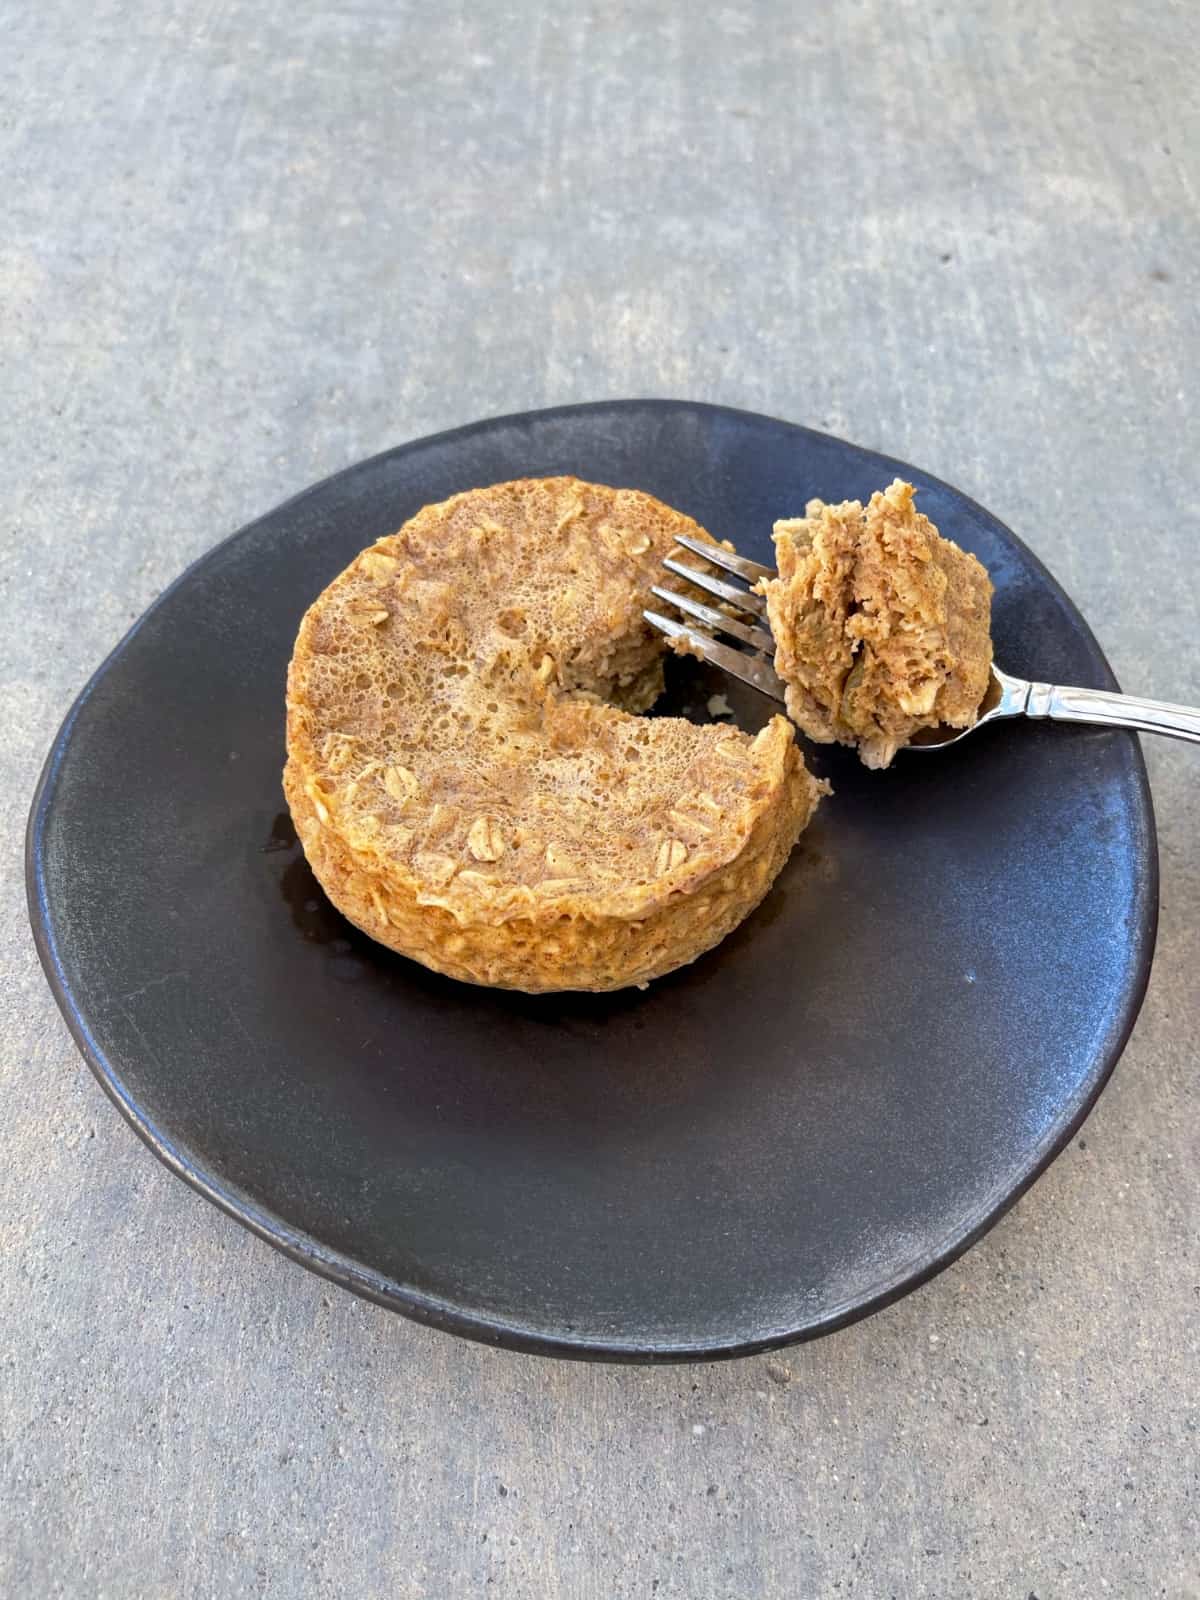 Oatmeal raisin muffin on brown plate with piece of muffin on fork.